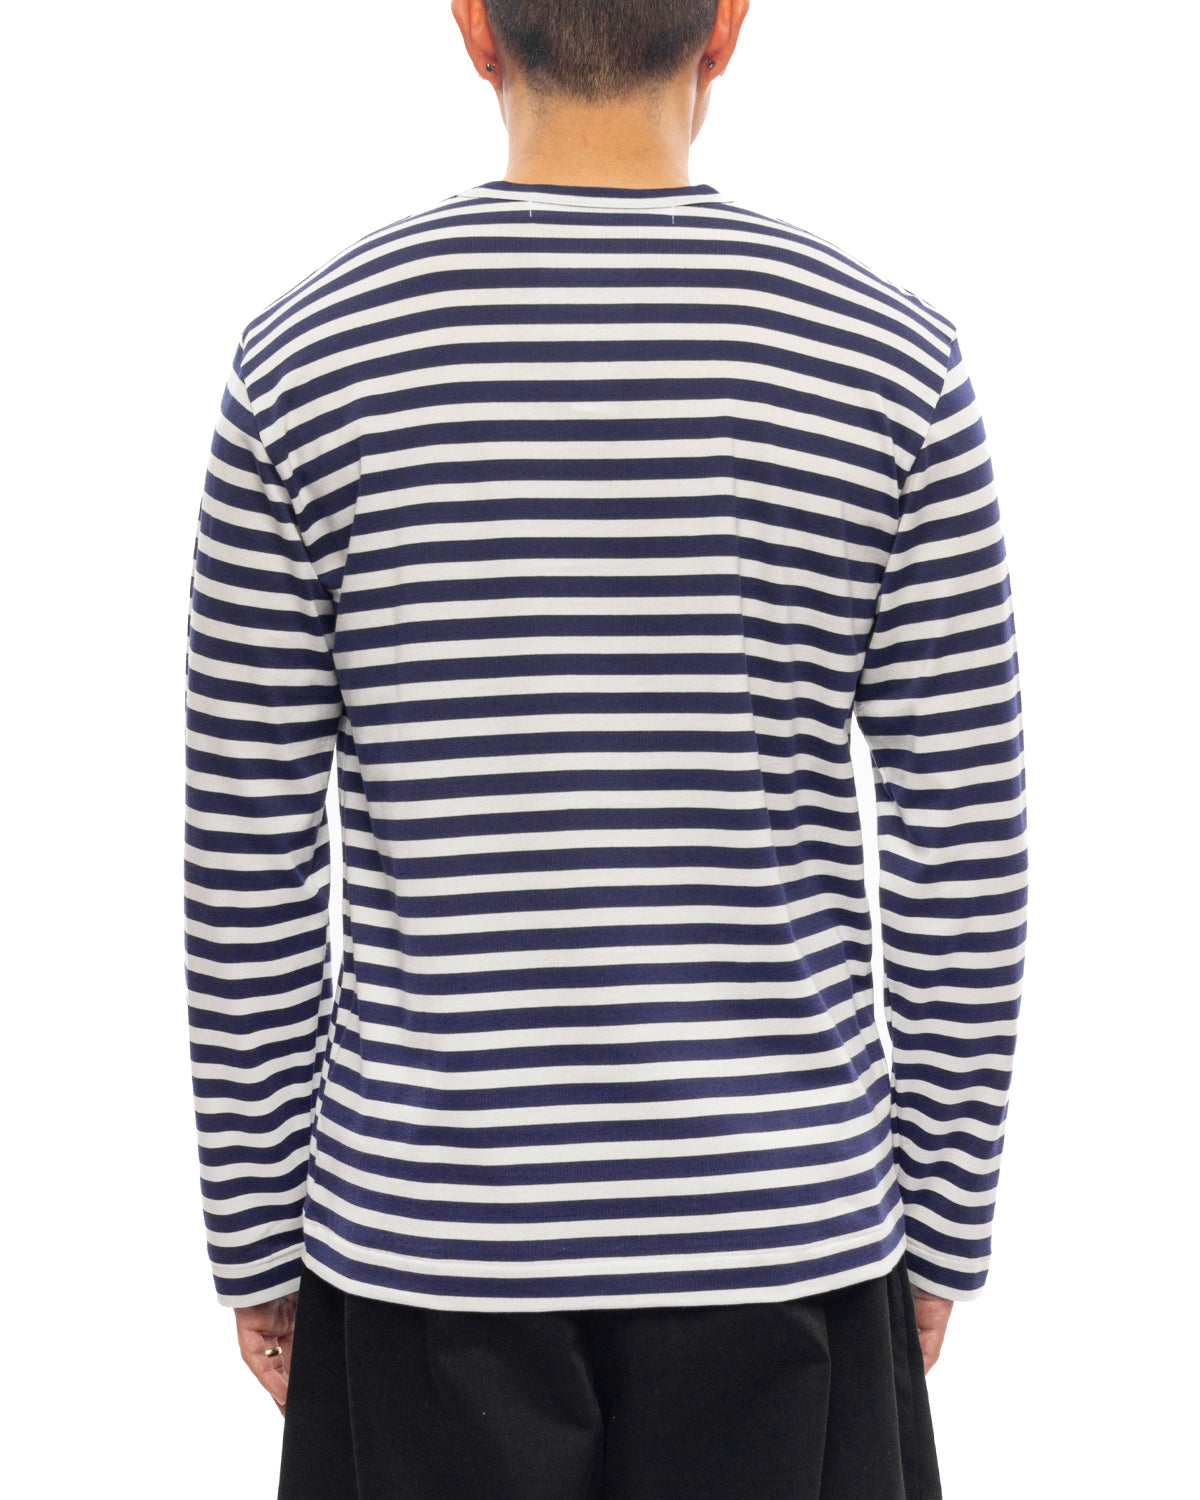 Striped Double Heart LS White/Navy